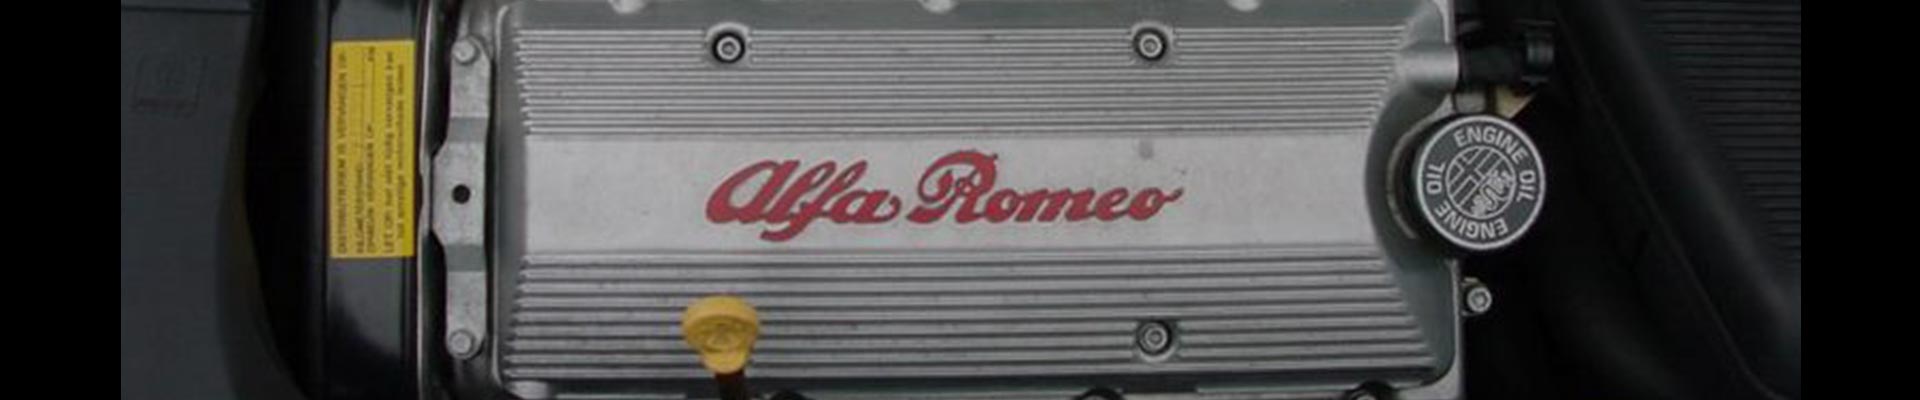 Shop Replacement 1995 Alfa Romeo 164 Parts with Discounted Price on the Net